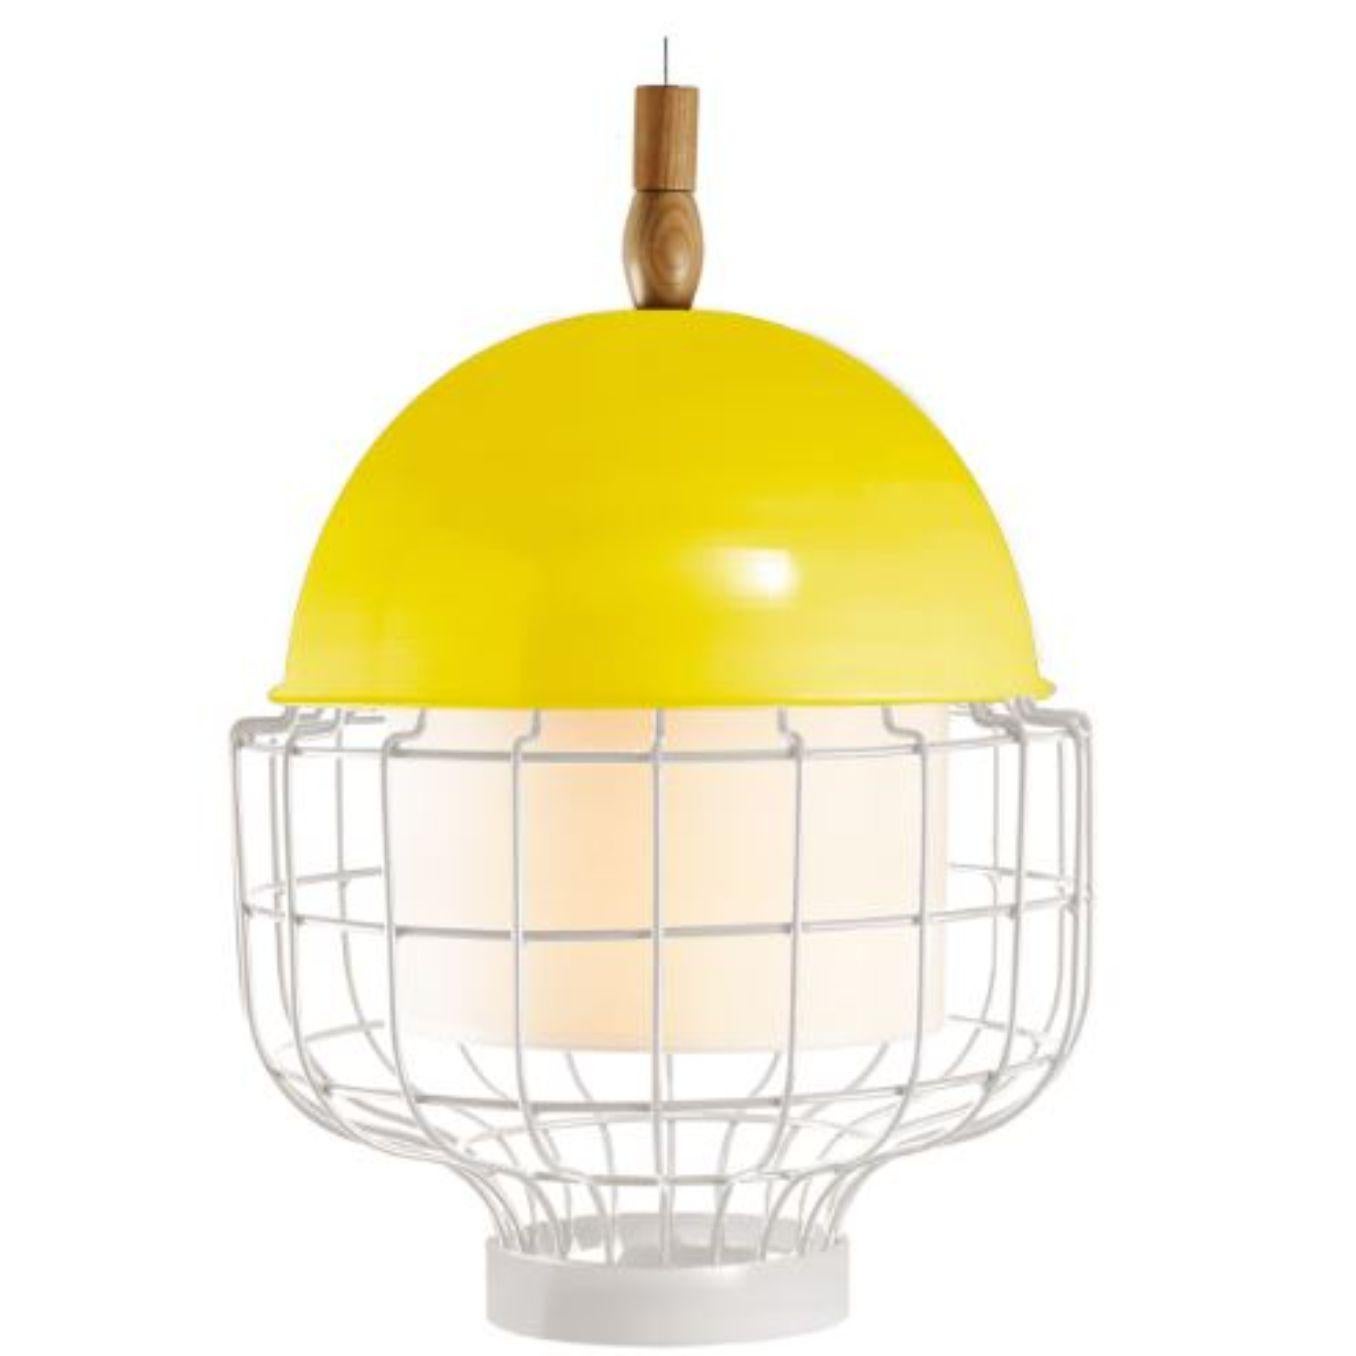 Yellow magnolia III suspension lamp by Dooq.
Dimensions: W 31 x D 31 x H 42 cm.
Materials: lacquered metal, polished or brushed metal.
abat-jour: cotton
Also available in different colours and materials.

Information:
230V/50Hz
E27/1x15W